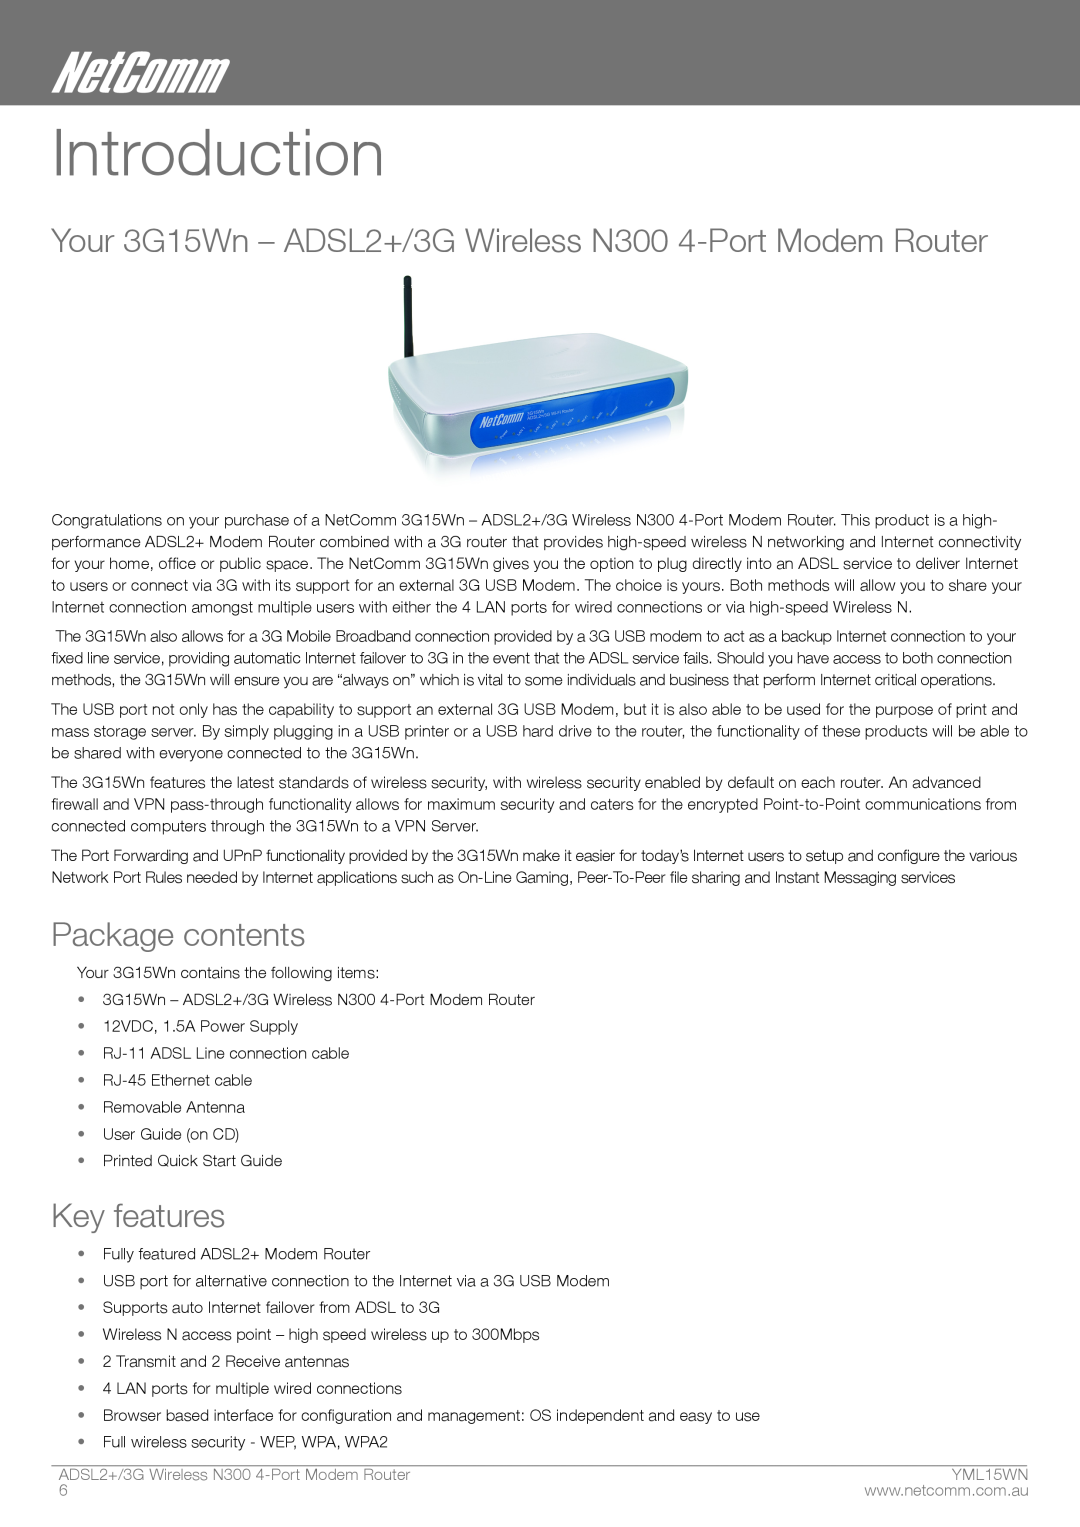 Nortel Networks Introduction, Your 3G15Wn - ADSL2+/3G Wireless N300 4-Port Modem Router, Package contents, Key features 